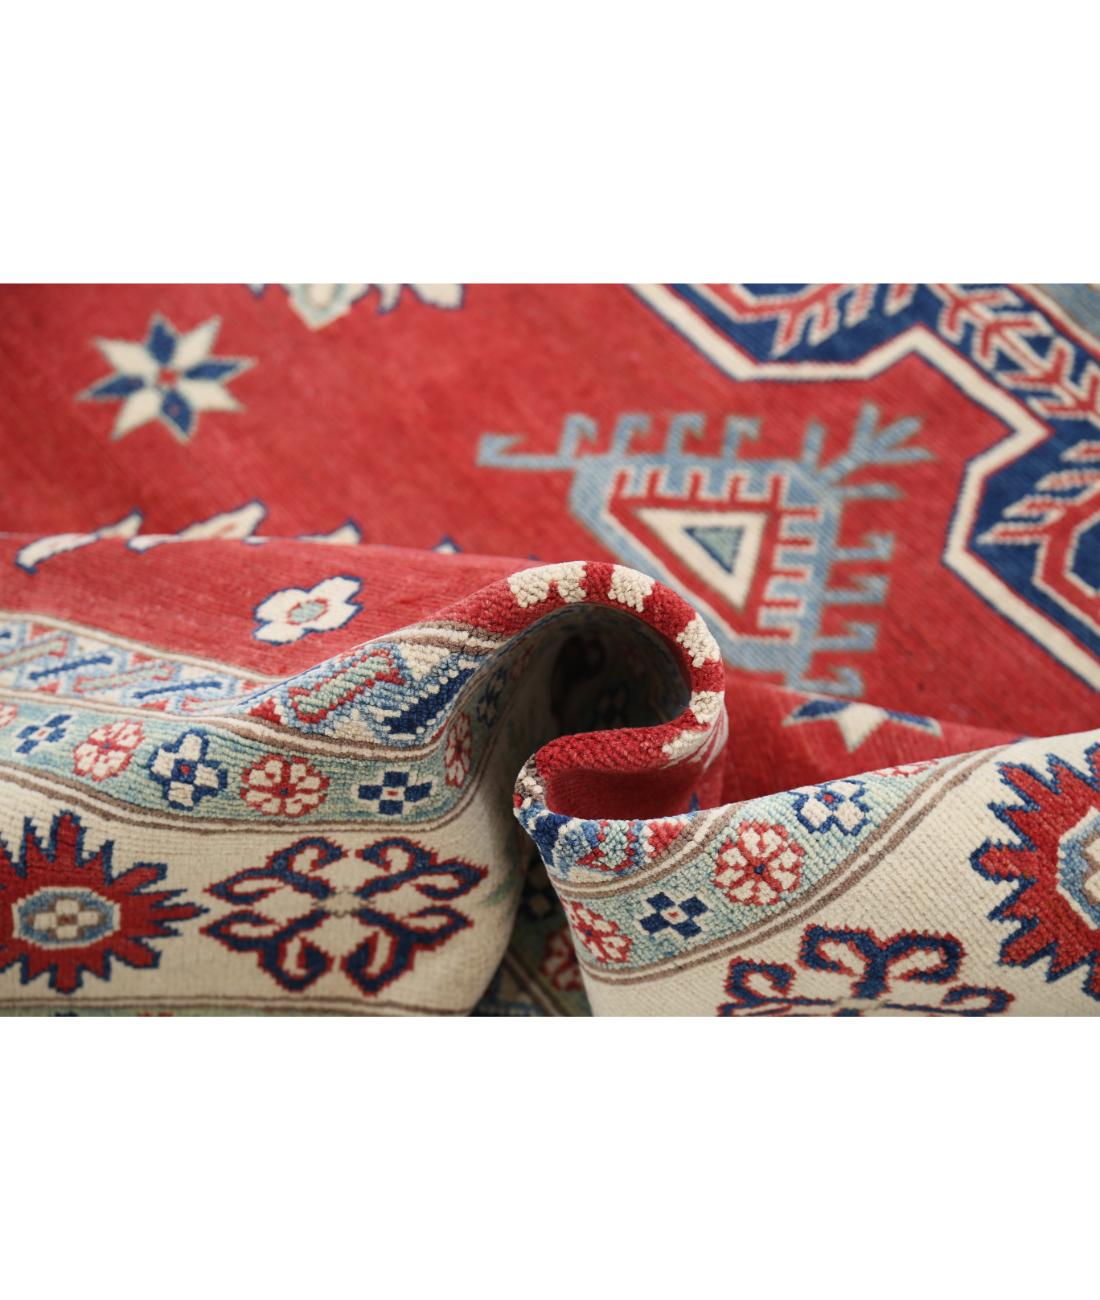 Hand Knotted Tribal Kazak Wool Rug - 6'9'' x 9'9'' 6' 9" X 9' 9" (206 X 297) / Red / Ivory